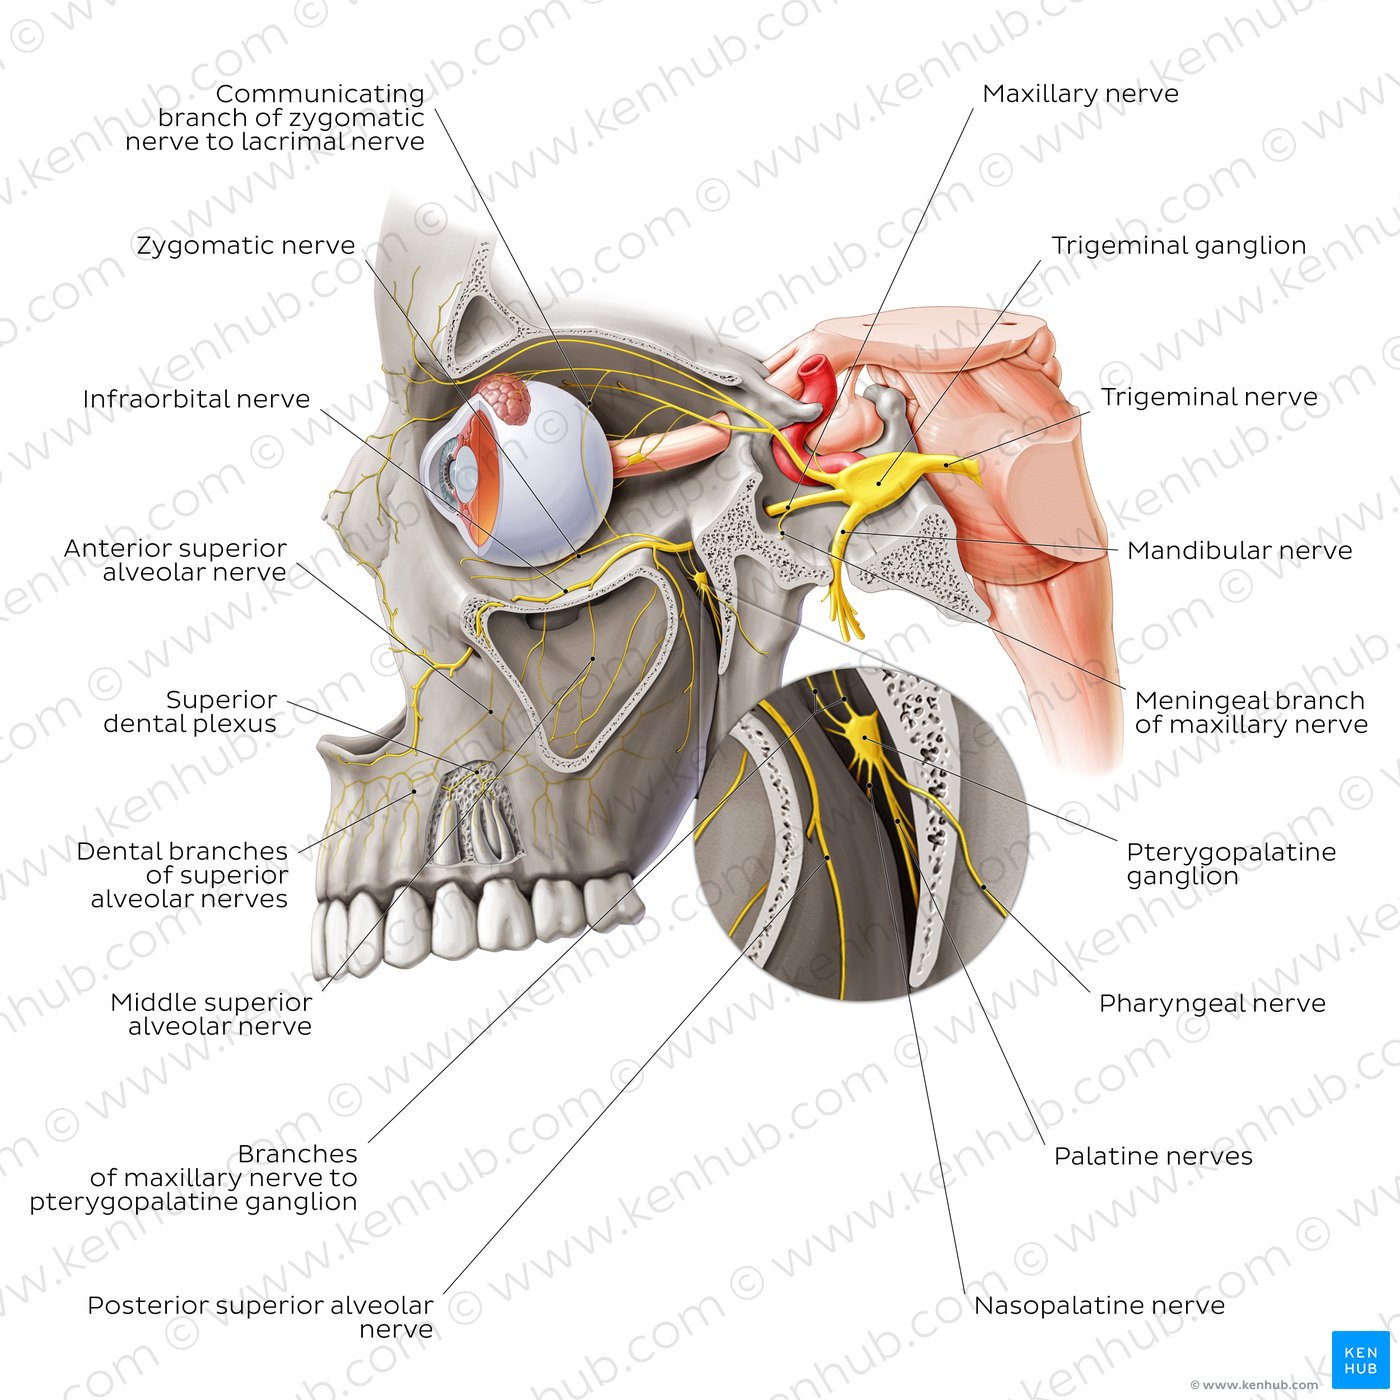 Overview of the maxillary nerve (lateral-left view)